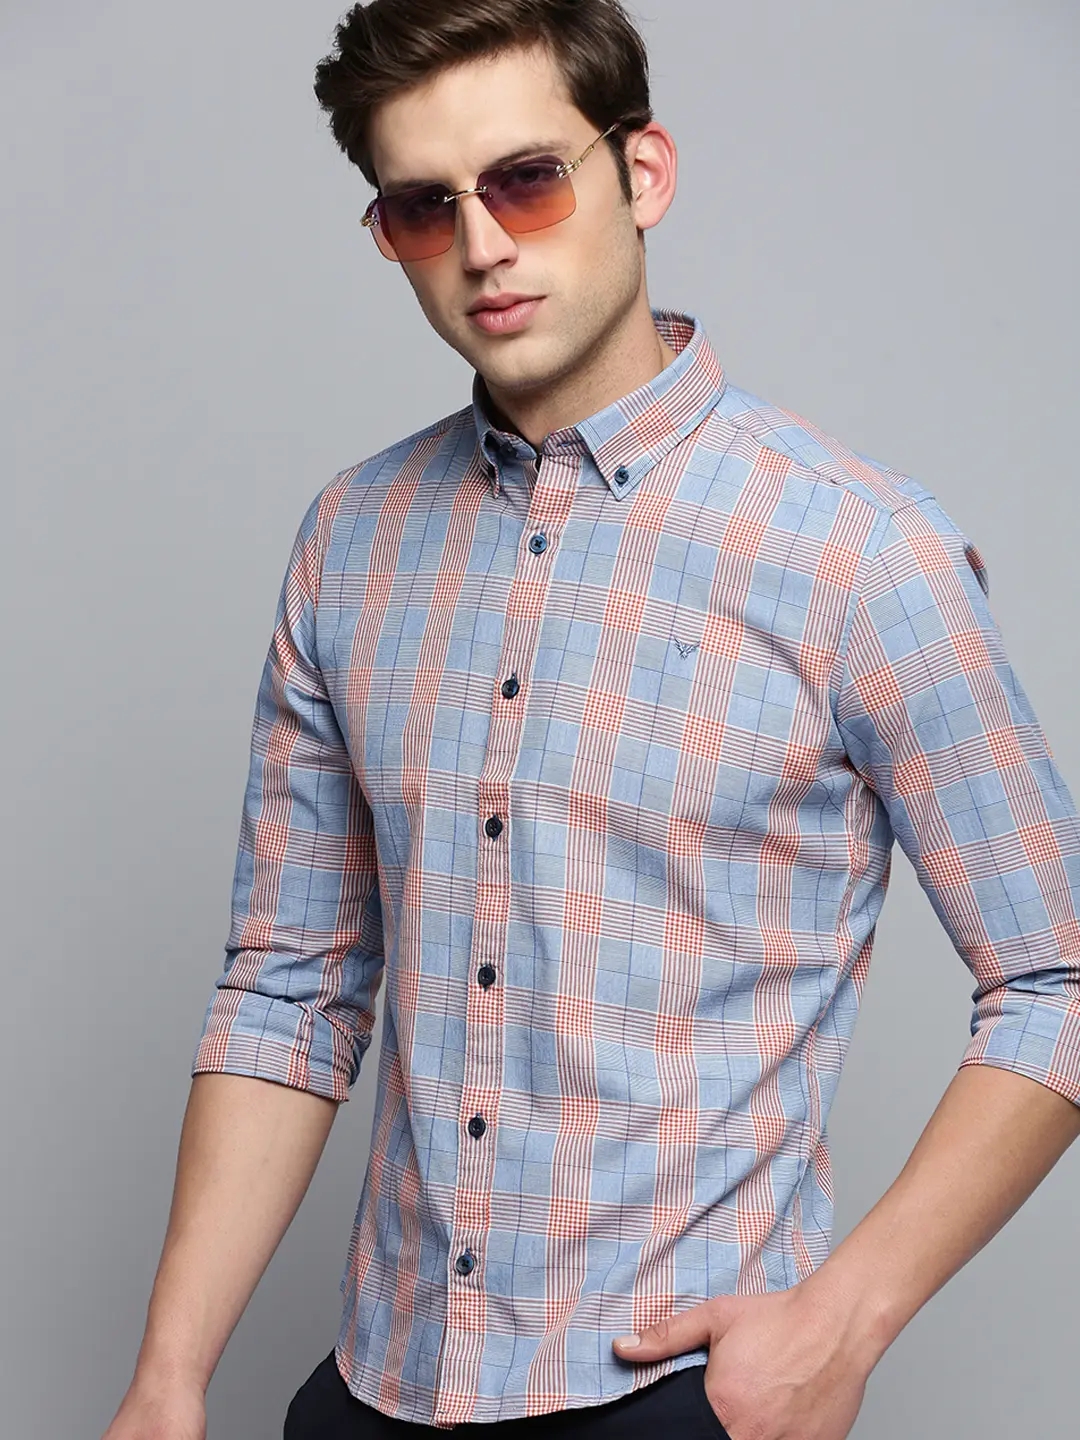 Showoff | SHOWOFF Men's Spread Collar Checked Blue Classic Shirt